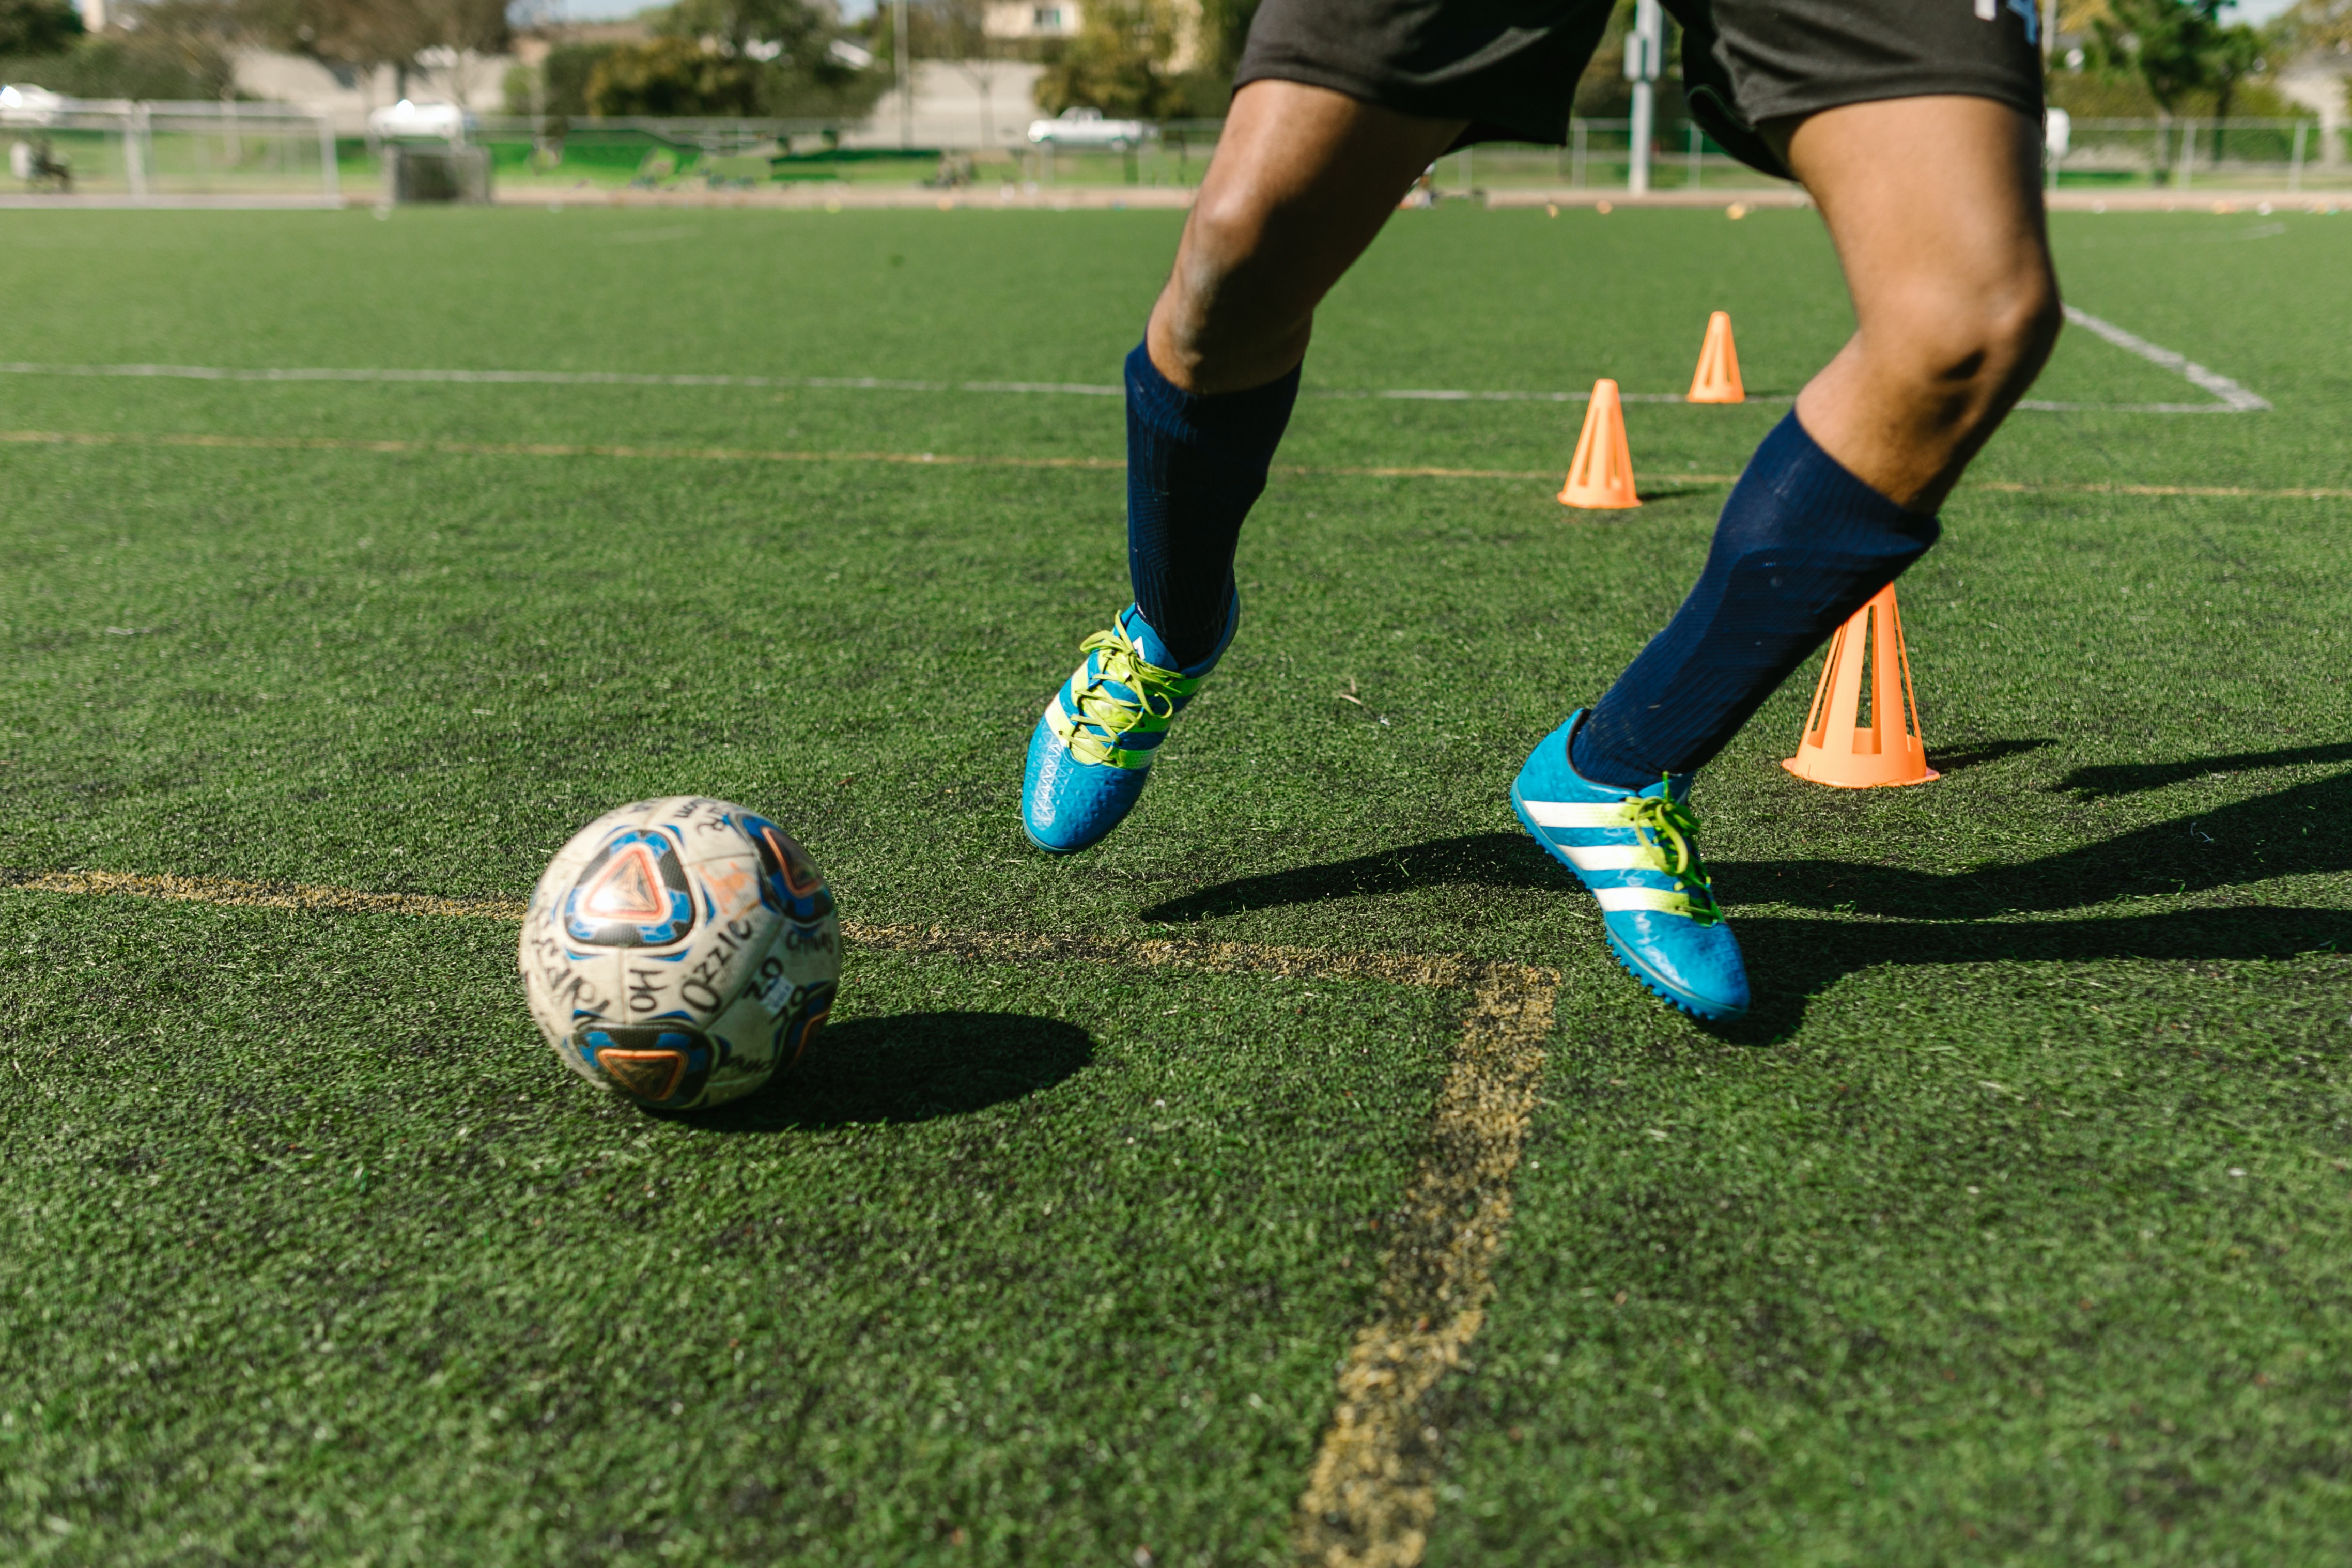 Soccer Shoe Weight: Does It Matter and Why?